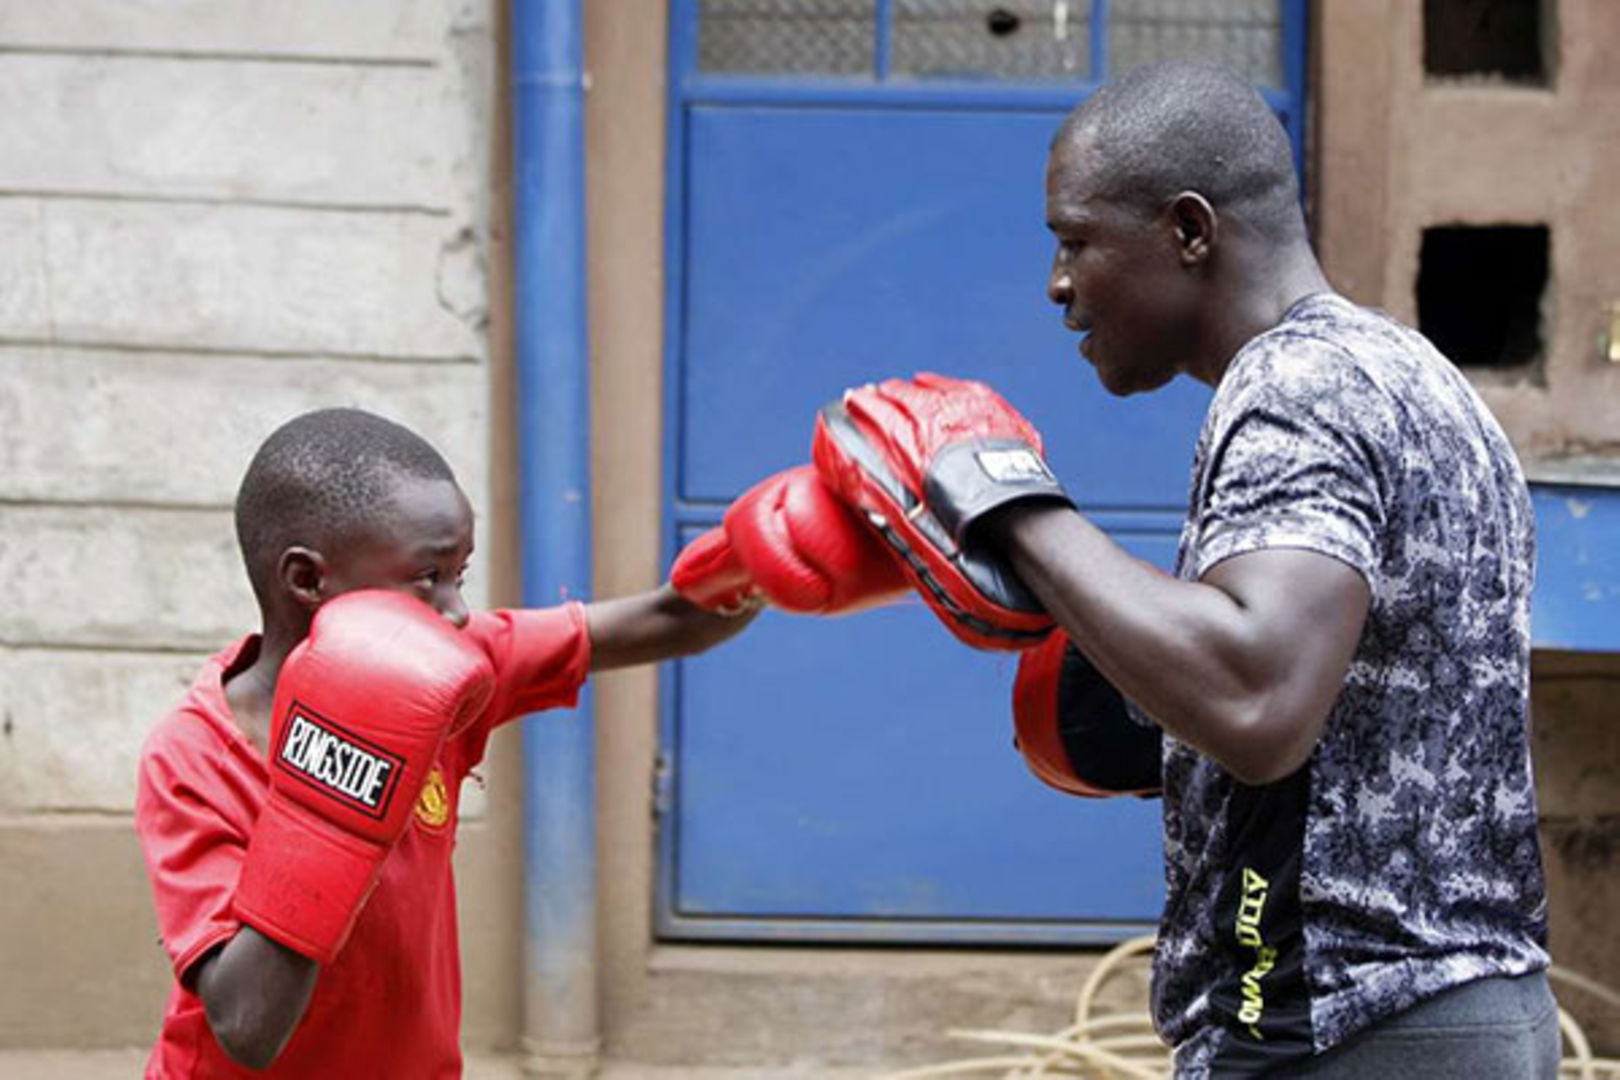 Kenya Boxing Club - The four basic types of blows in boxing: Jab